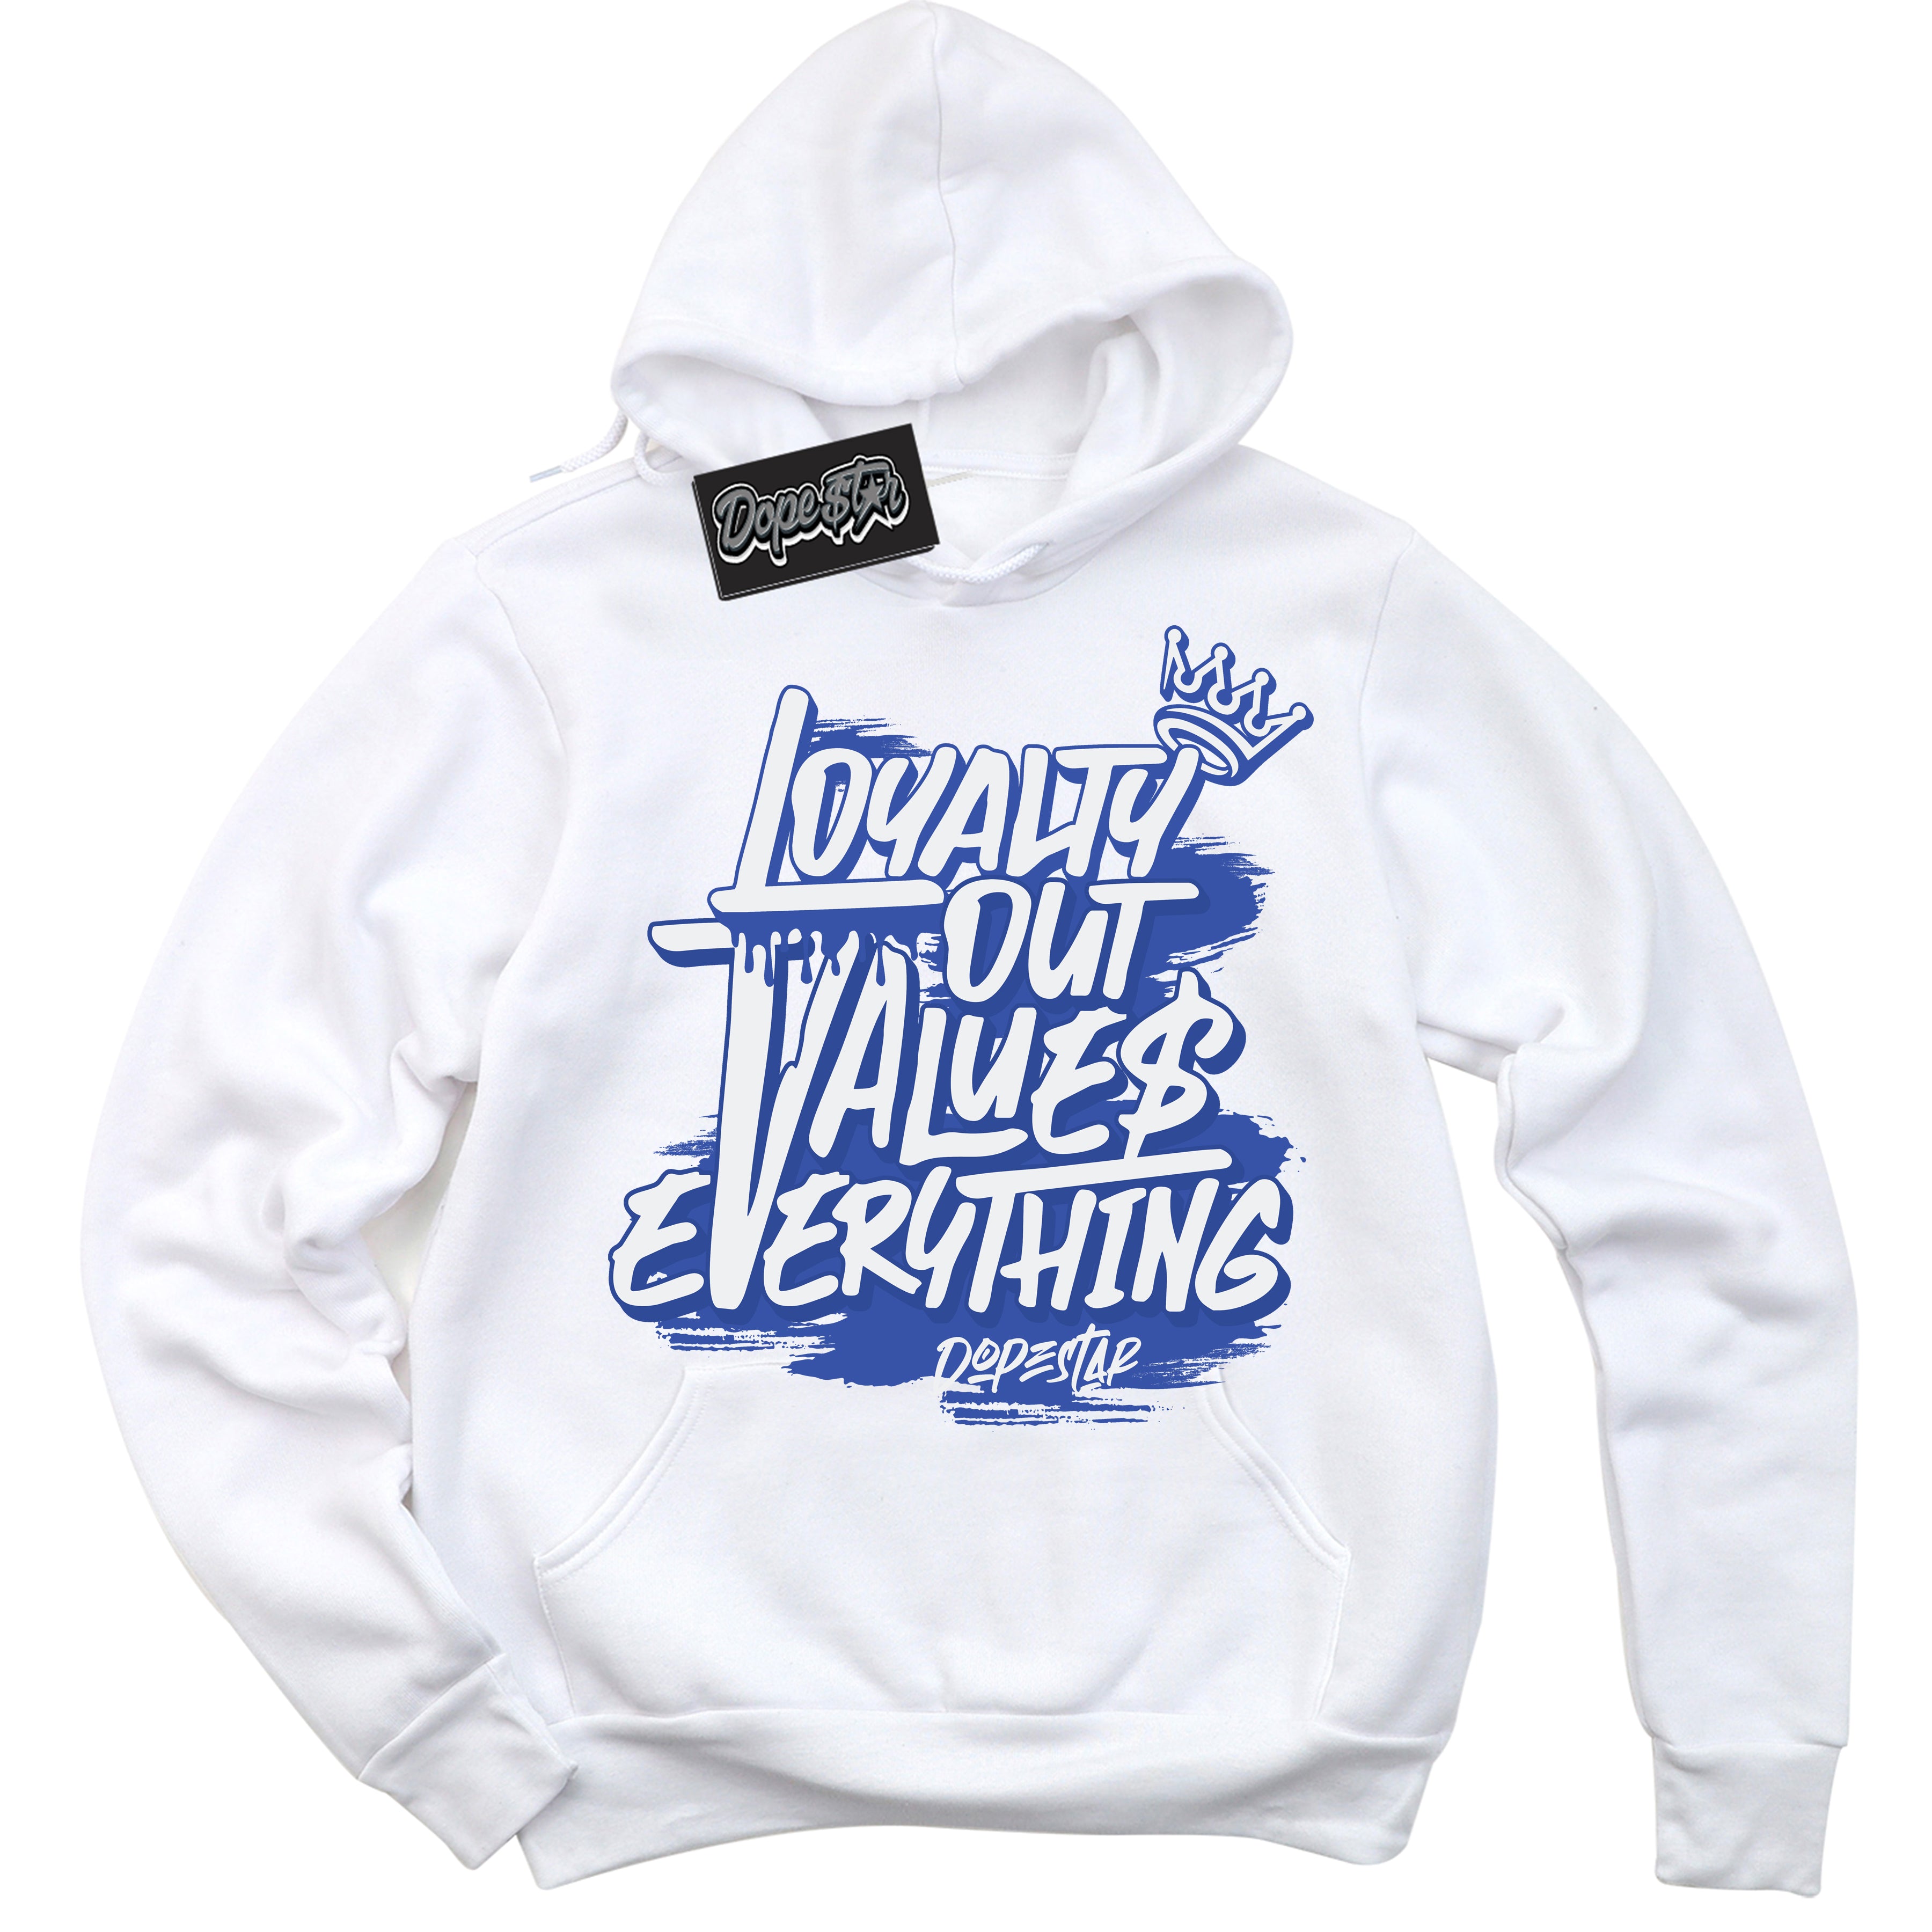 Cool White Hoodie with “ Loyalty Out Values Everything ”  design that Perfectly Matches  Racer Blue Photon Dust Sneakers.